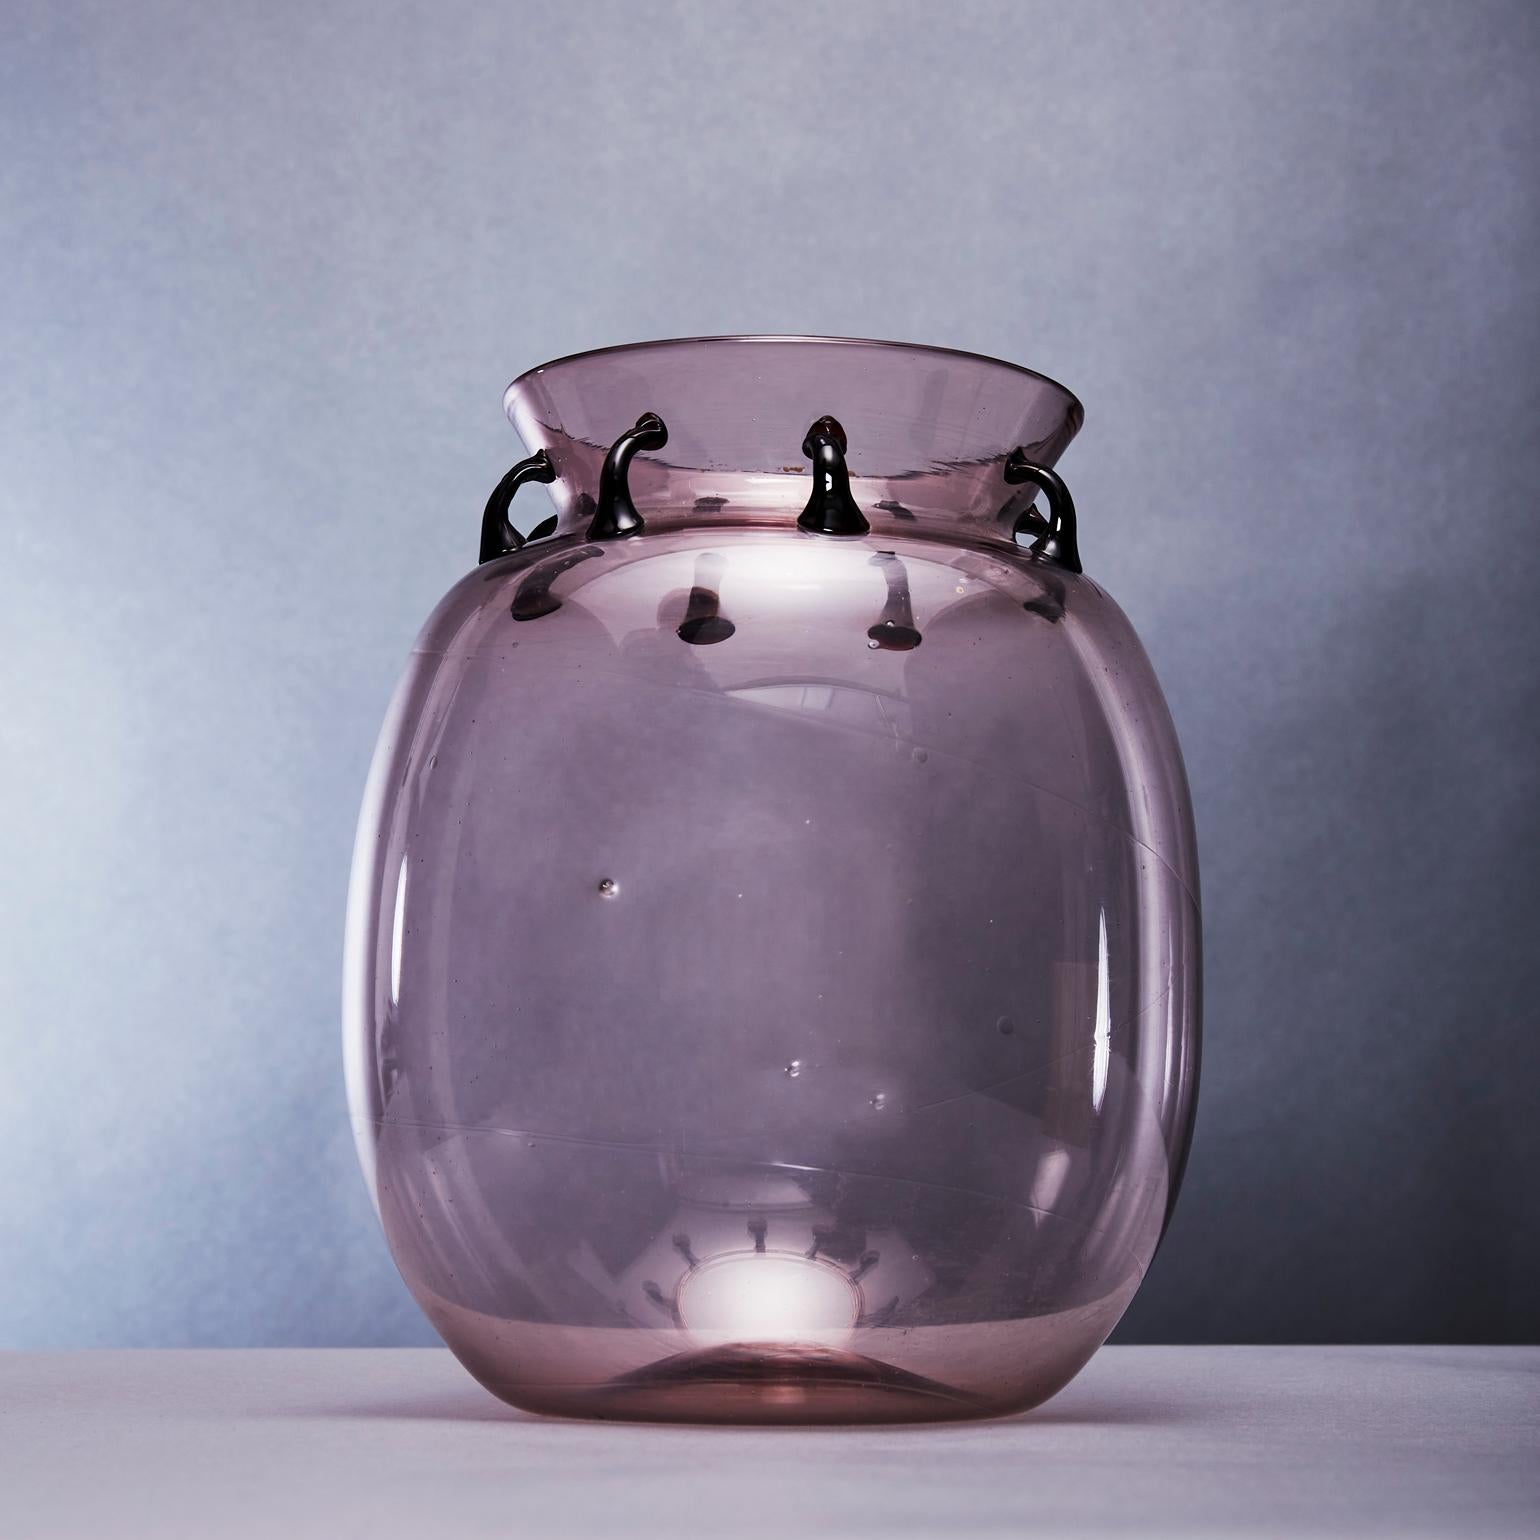 Iridescence bulb shaped Soffiato vaseModel no. 1416, with applied multiple handles, close to and around the opening of the fluted mouth of the vase. A technique where the delicately hand blown vessel achieves a thin wall of amethyst colored glass to